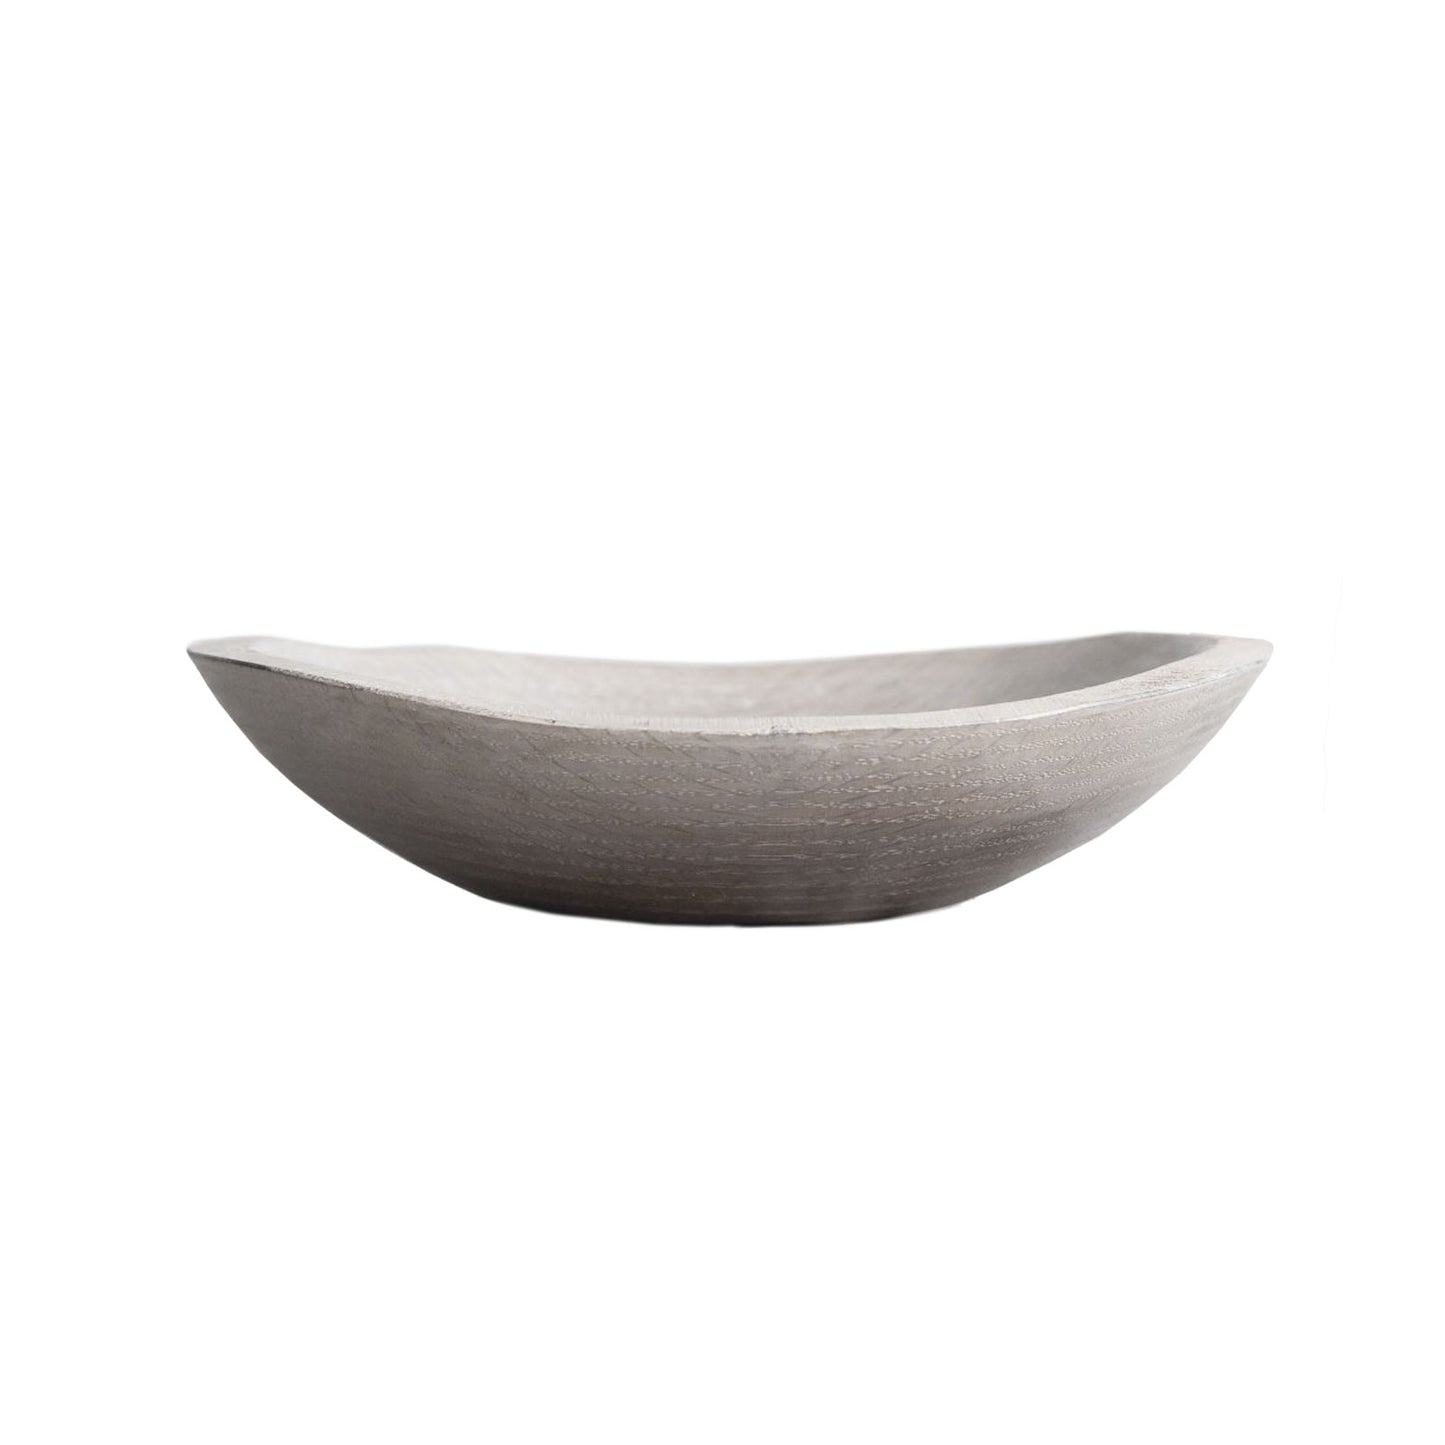 Driftwood Oval Bowl, 15"